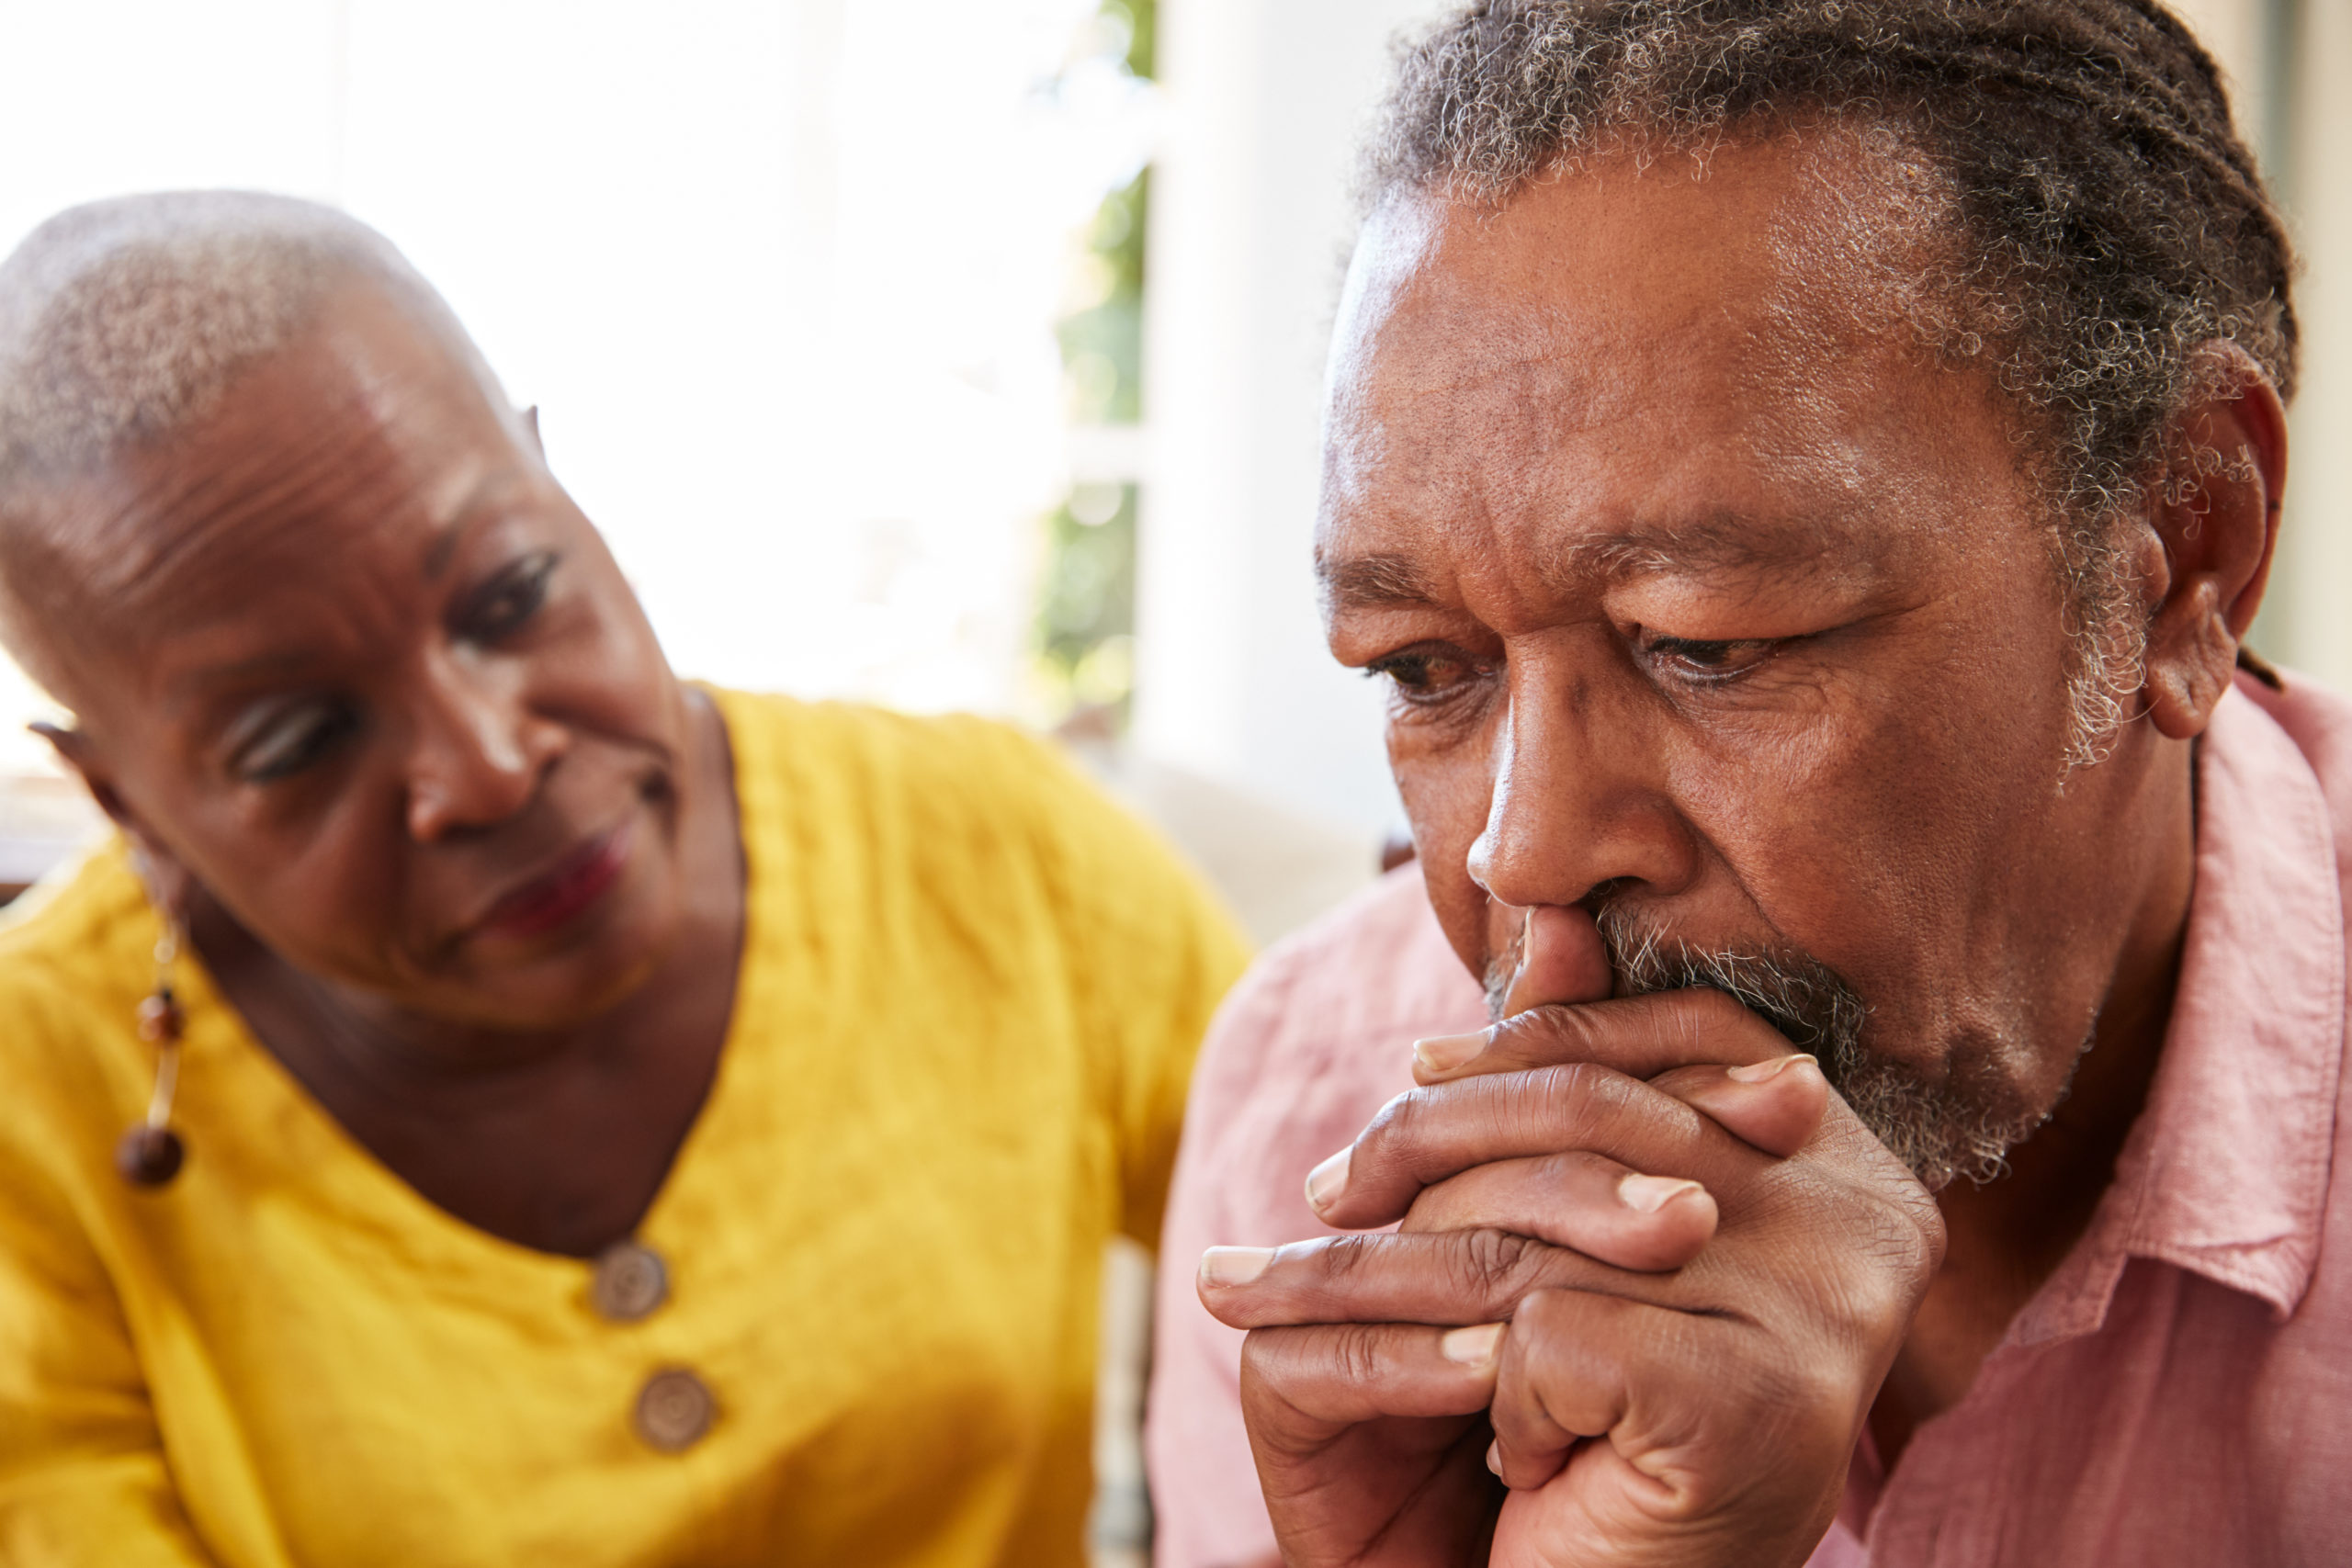 Why Depression Warning Signs Are Commonly Missed in Older Adults